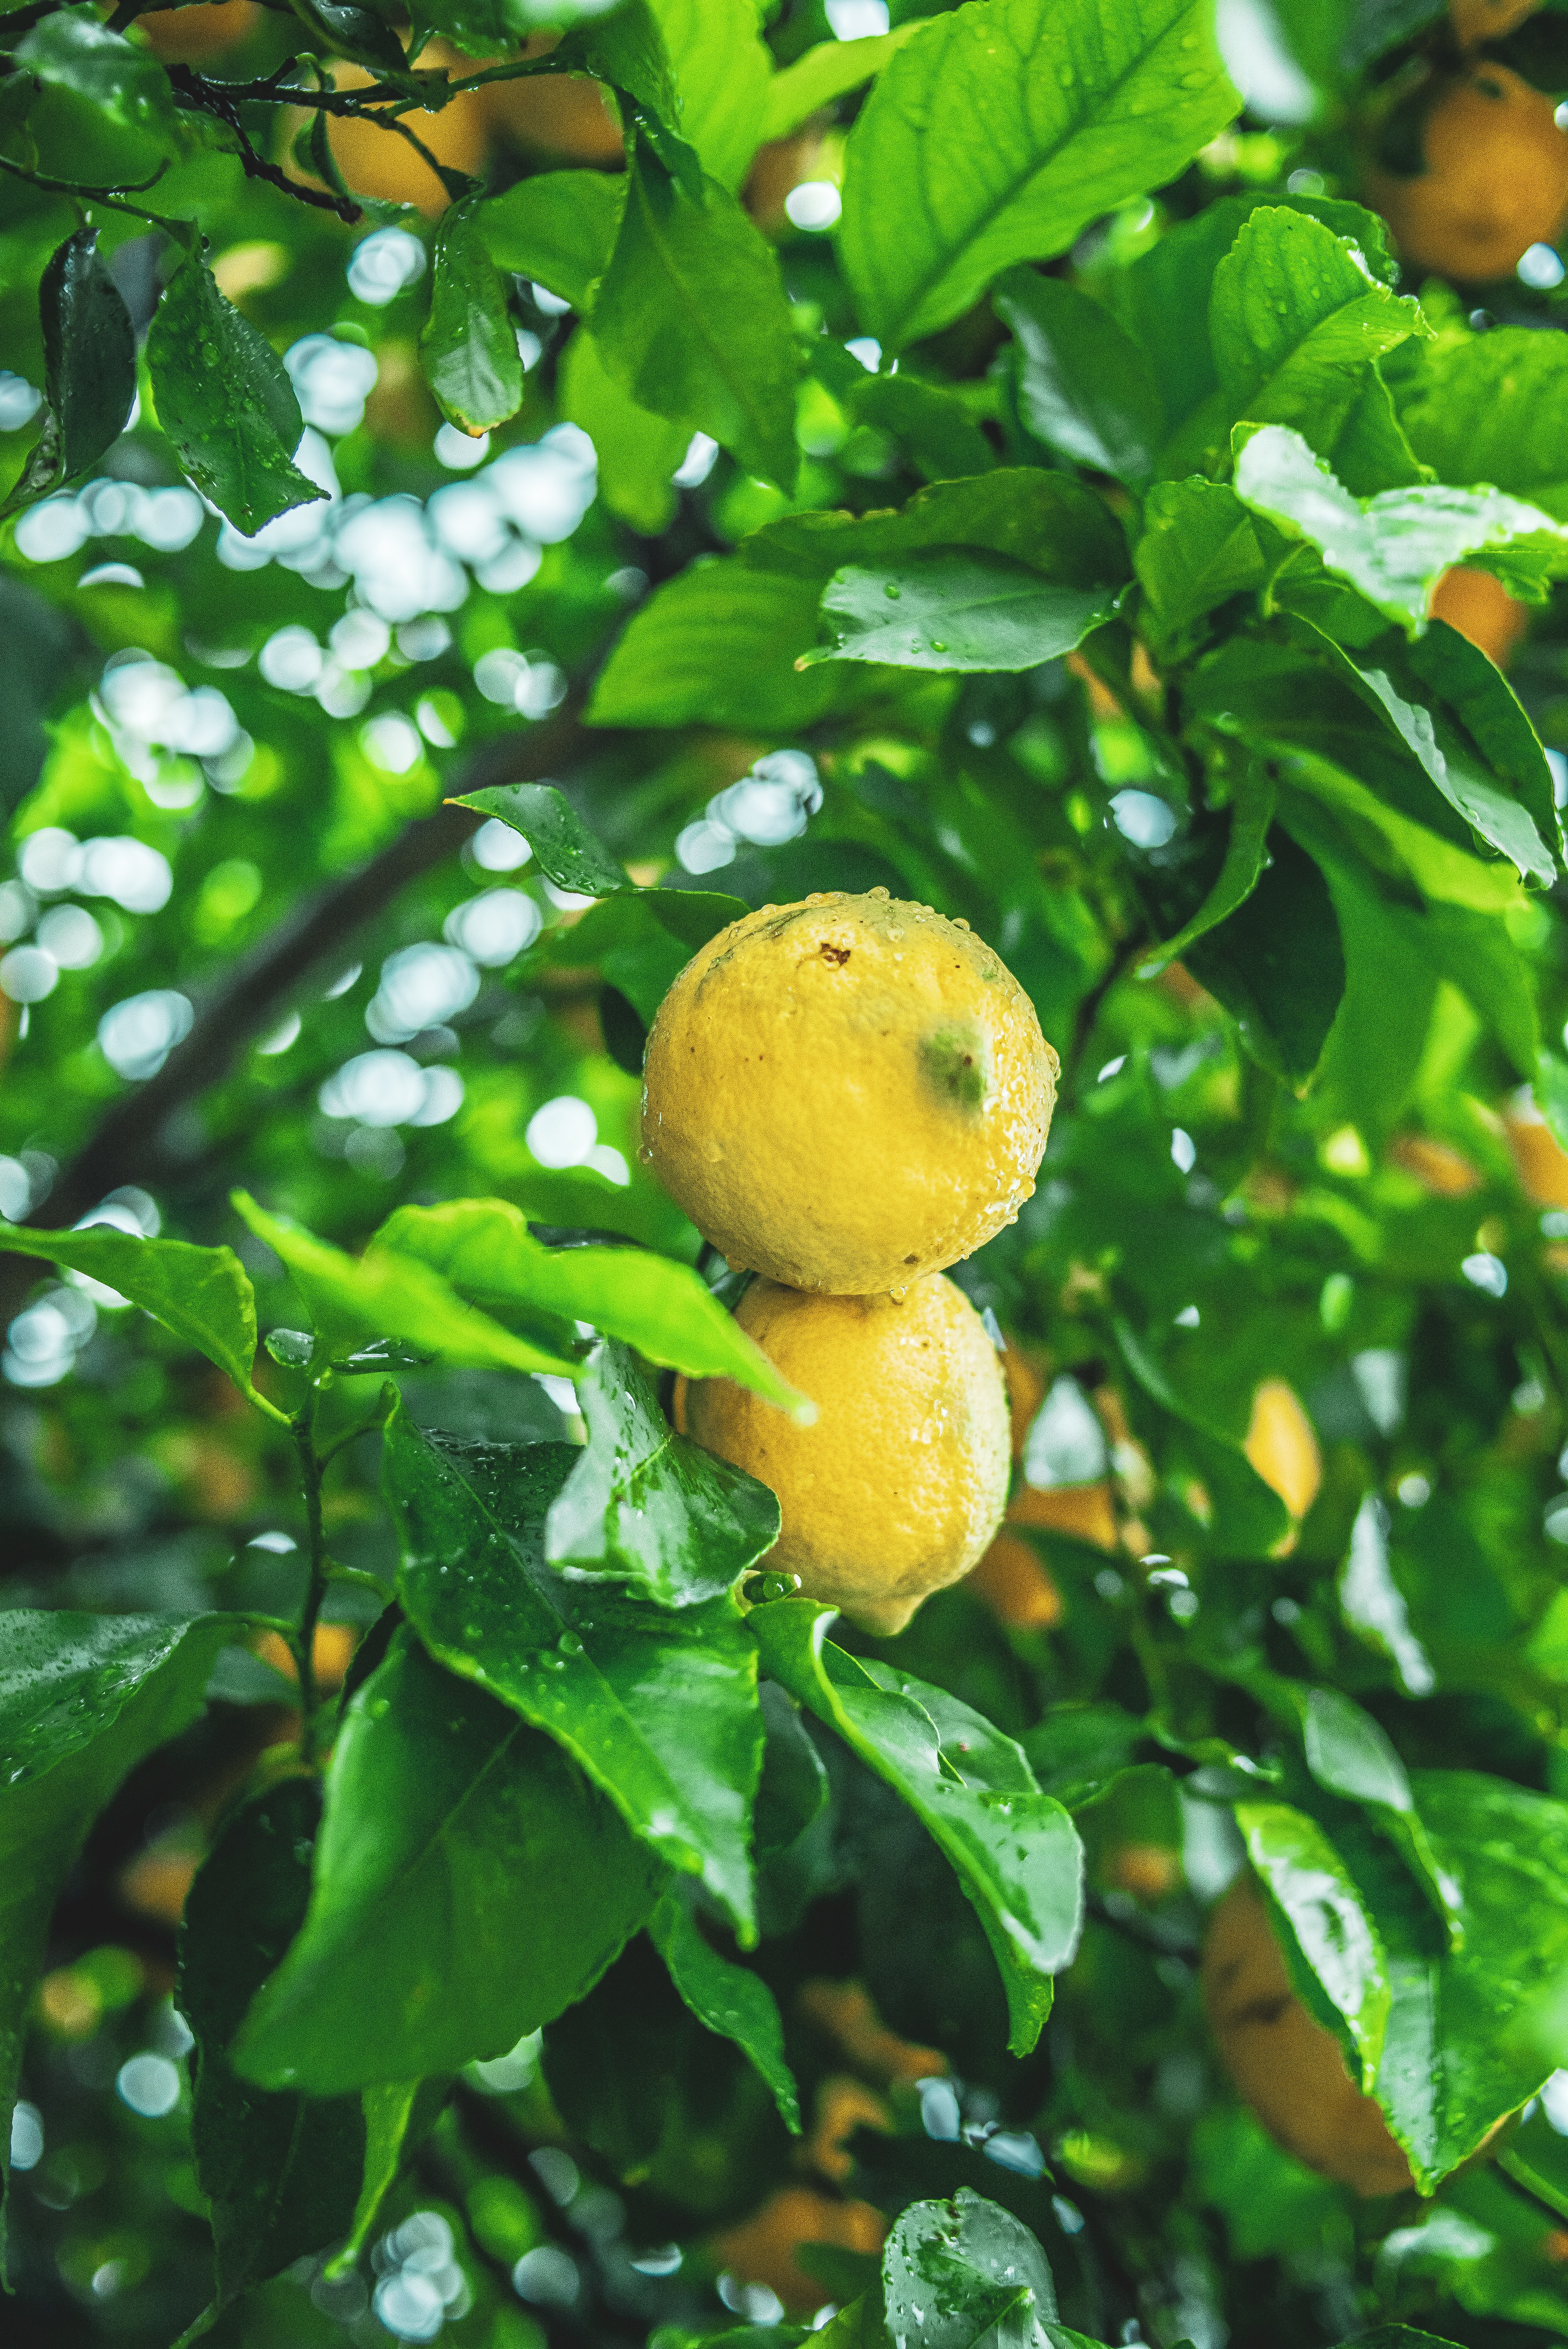 53215 download wallpaper nature, lemons, yellow, wet, branch, fruit, citrus screensavers and pictures for free